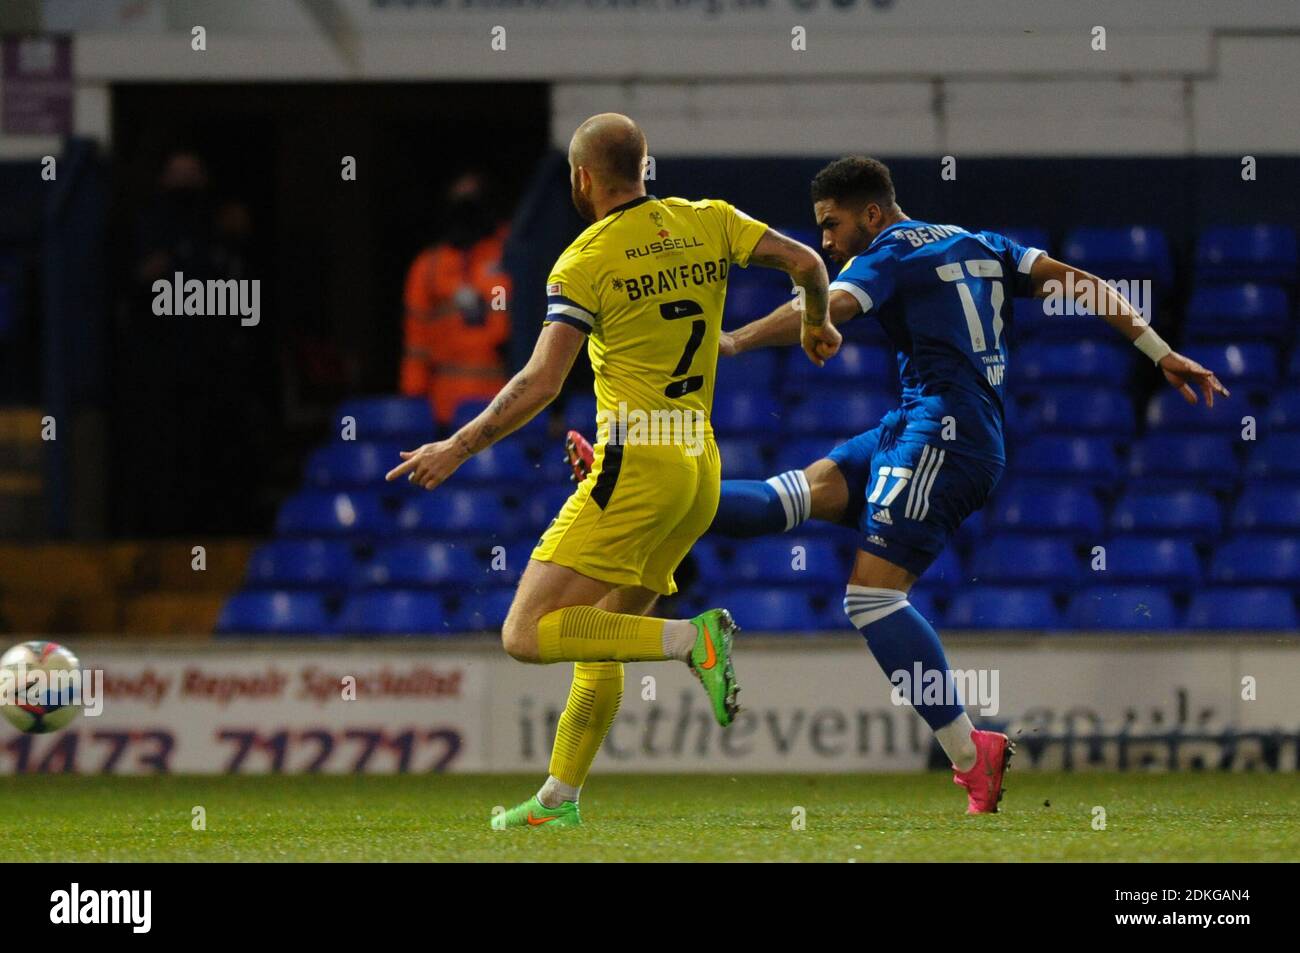 Ipswich, Suffolk, UK. 15th December, 2020. Ipswichs Keanan Bennetts scores the opening goal during the Sky Bet League 1 match between Ipswich Town and Burton Albion at Portman Road, Ipswich on Tuesday 15th December 2020. (Credit: Ben Pooley | MI News) Credit: MI News & Sport /Alamy Live News Stock Photo